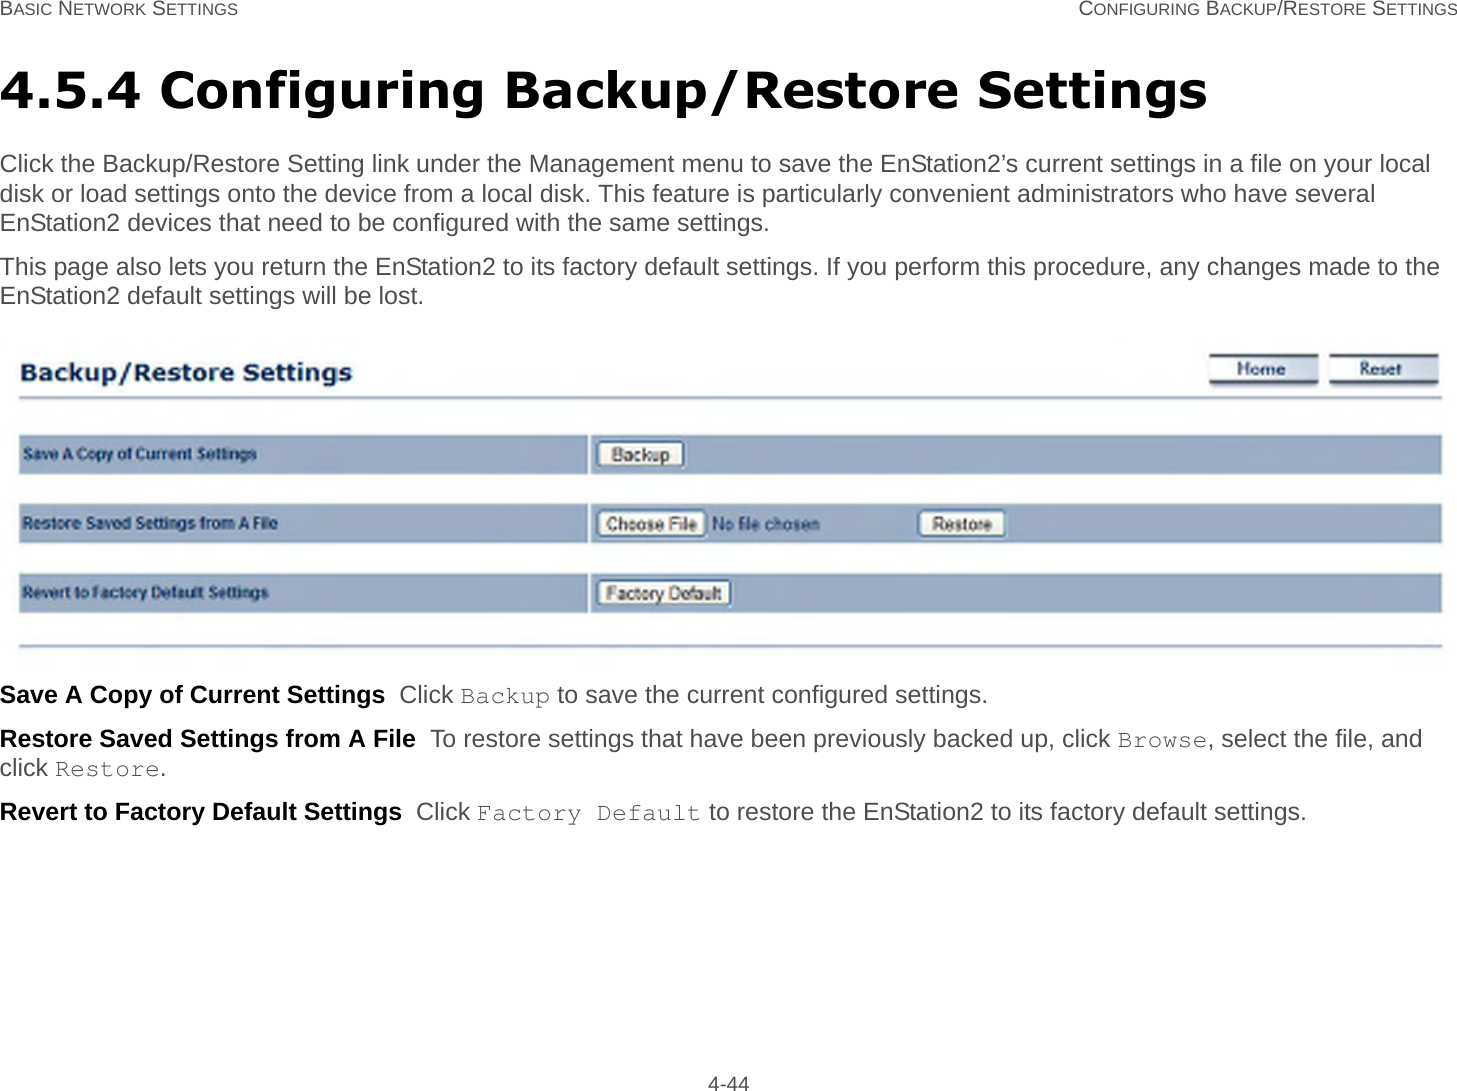 BASIC NETWORK SETTINGS CONFIGURING BACKUP/RESTORE SETTINGS 4-444.5.4 Configuring Backup/Restore SettingsClick the Backup/Restore Setting link under the Management menu to save the EnStation2’s current settings in a file on your local disk or load settings onto the device from a local disk. This feature is particularly convenient administrators who have several EnStation2 devices that need to be configured with the same settings.This page also lets you return the EnStation2 to its factory default settings. If you perform this procedure, any changes made to the EnStation2 default settings will be lost.Save A Copy of Current Settings  Click Backup to save the current configured settings.Restore Saved Settings from A File  To restore settings that have been previously backed up, click Browse, select the file, and click Restore.Revert to Factory Default Settings  Click Factory Default to restore the EnStation2 to its factory default settings.